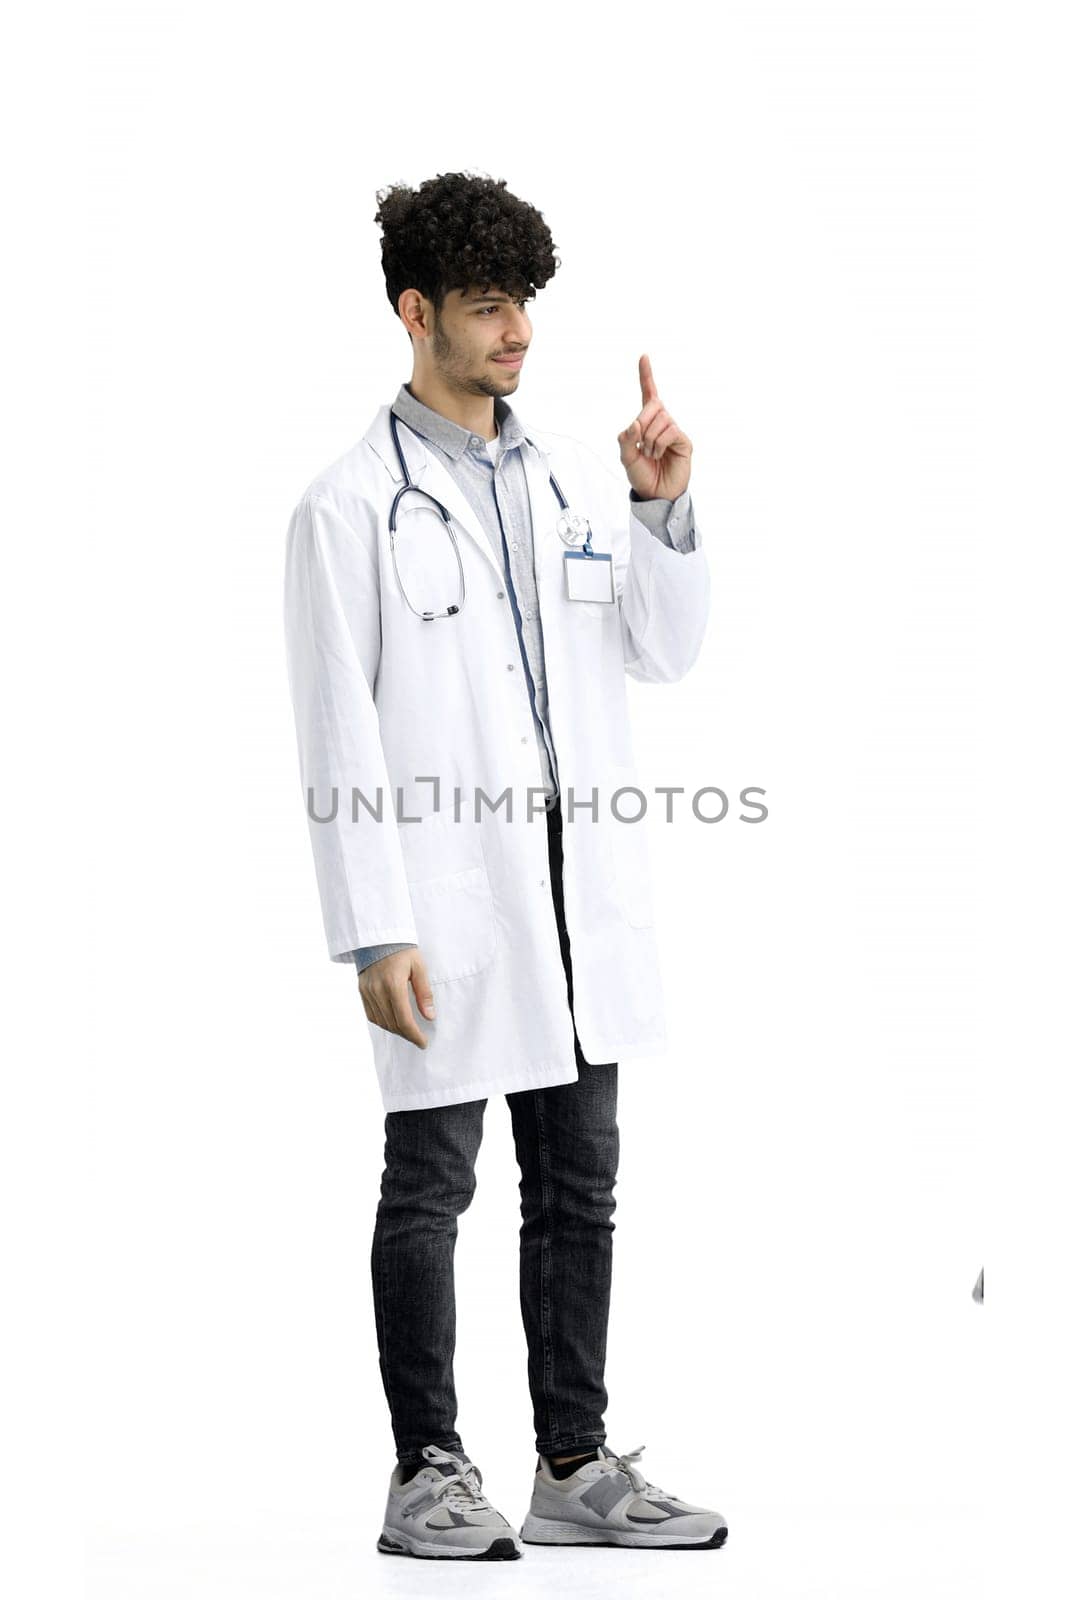 A male doctor, full-length, on a white background, shows an important sign by Prosto